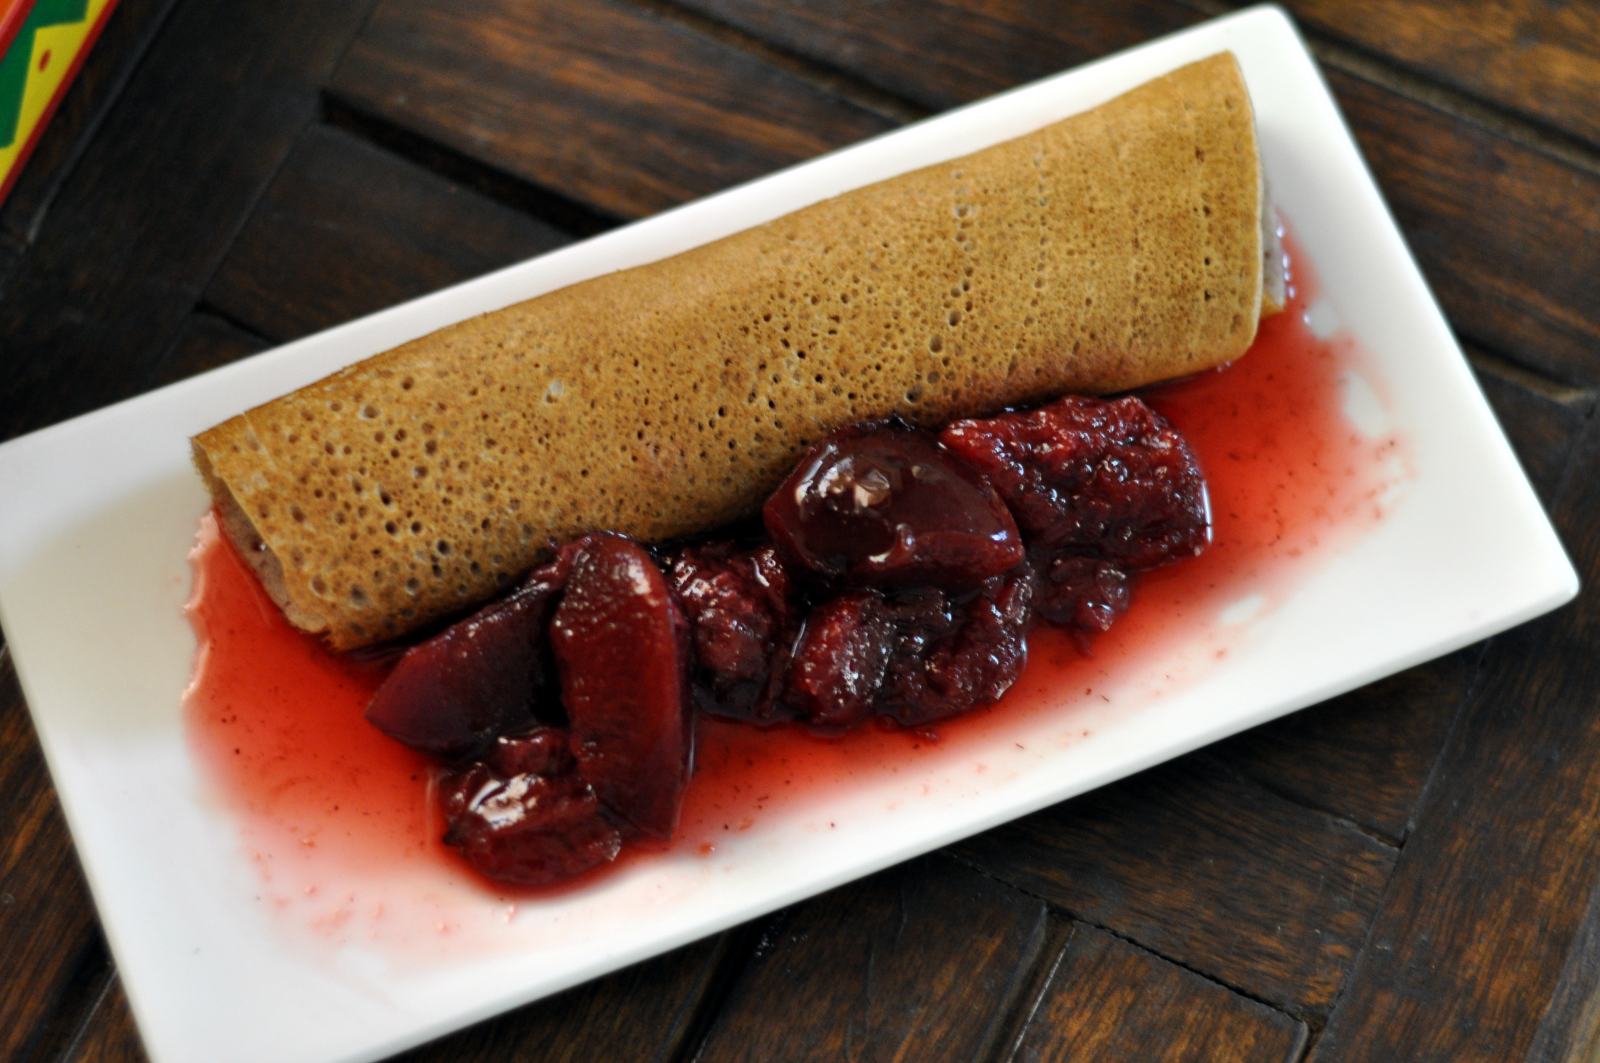 Buckwheat Crepe Recipe with Fruit Compote